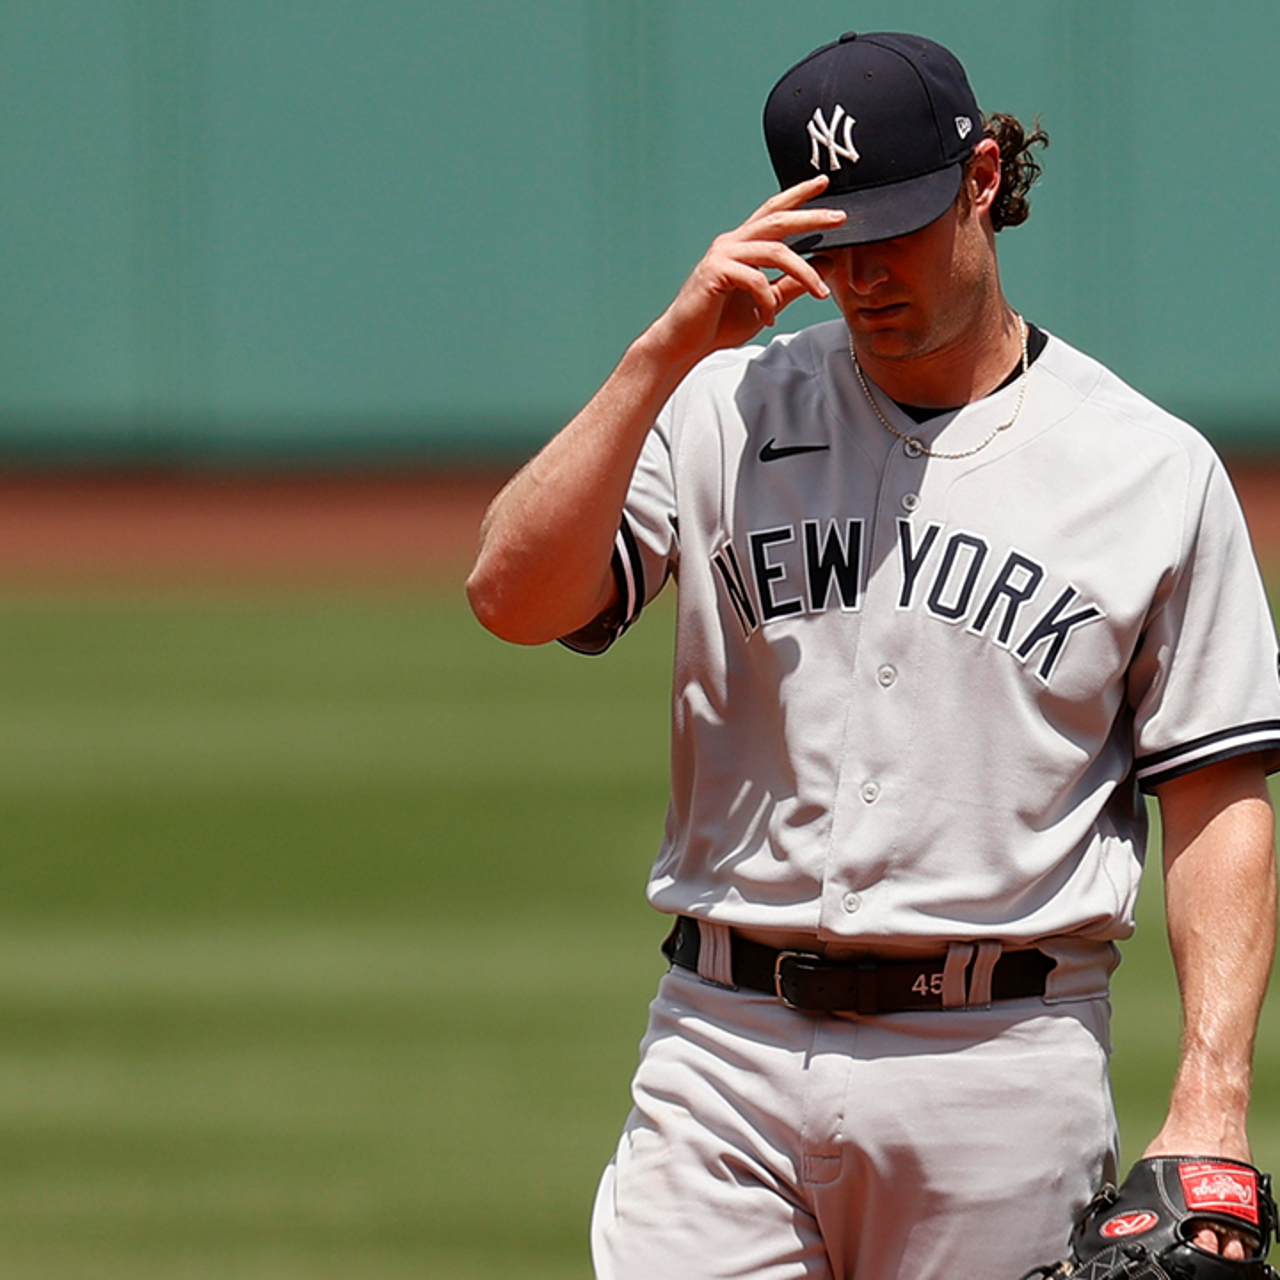 Is Nick Swisher going back to the New York Yankees?